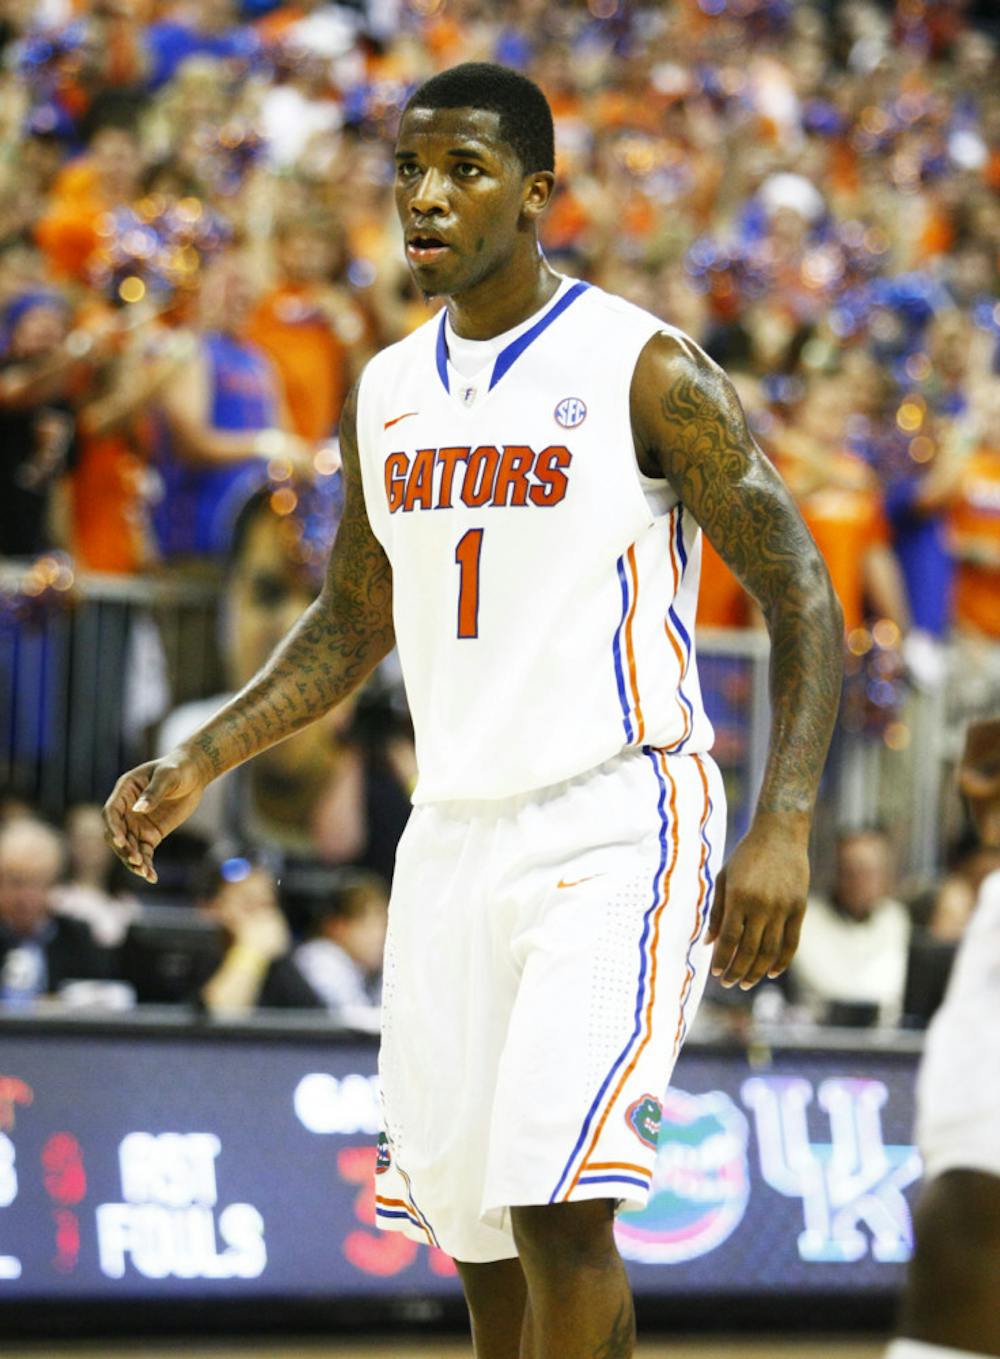 <p>Senior guard Kenny Boynton walks back to play defense after scoring during Florida’s 69-52 victory against Kentucky on Feb. 12 in the O’Connell Center. </p>